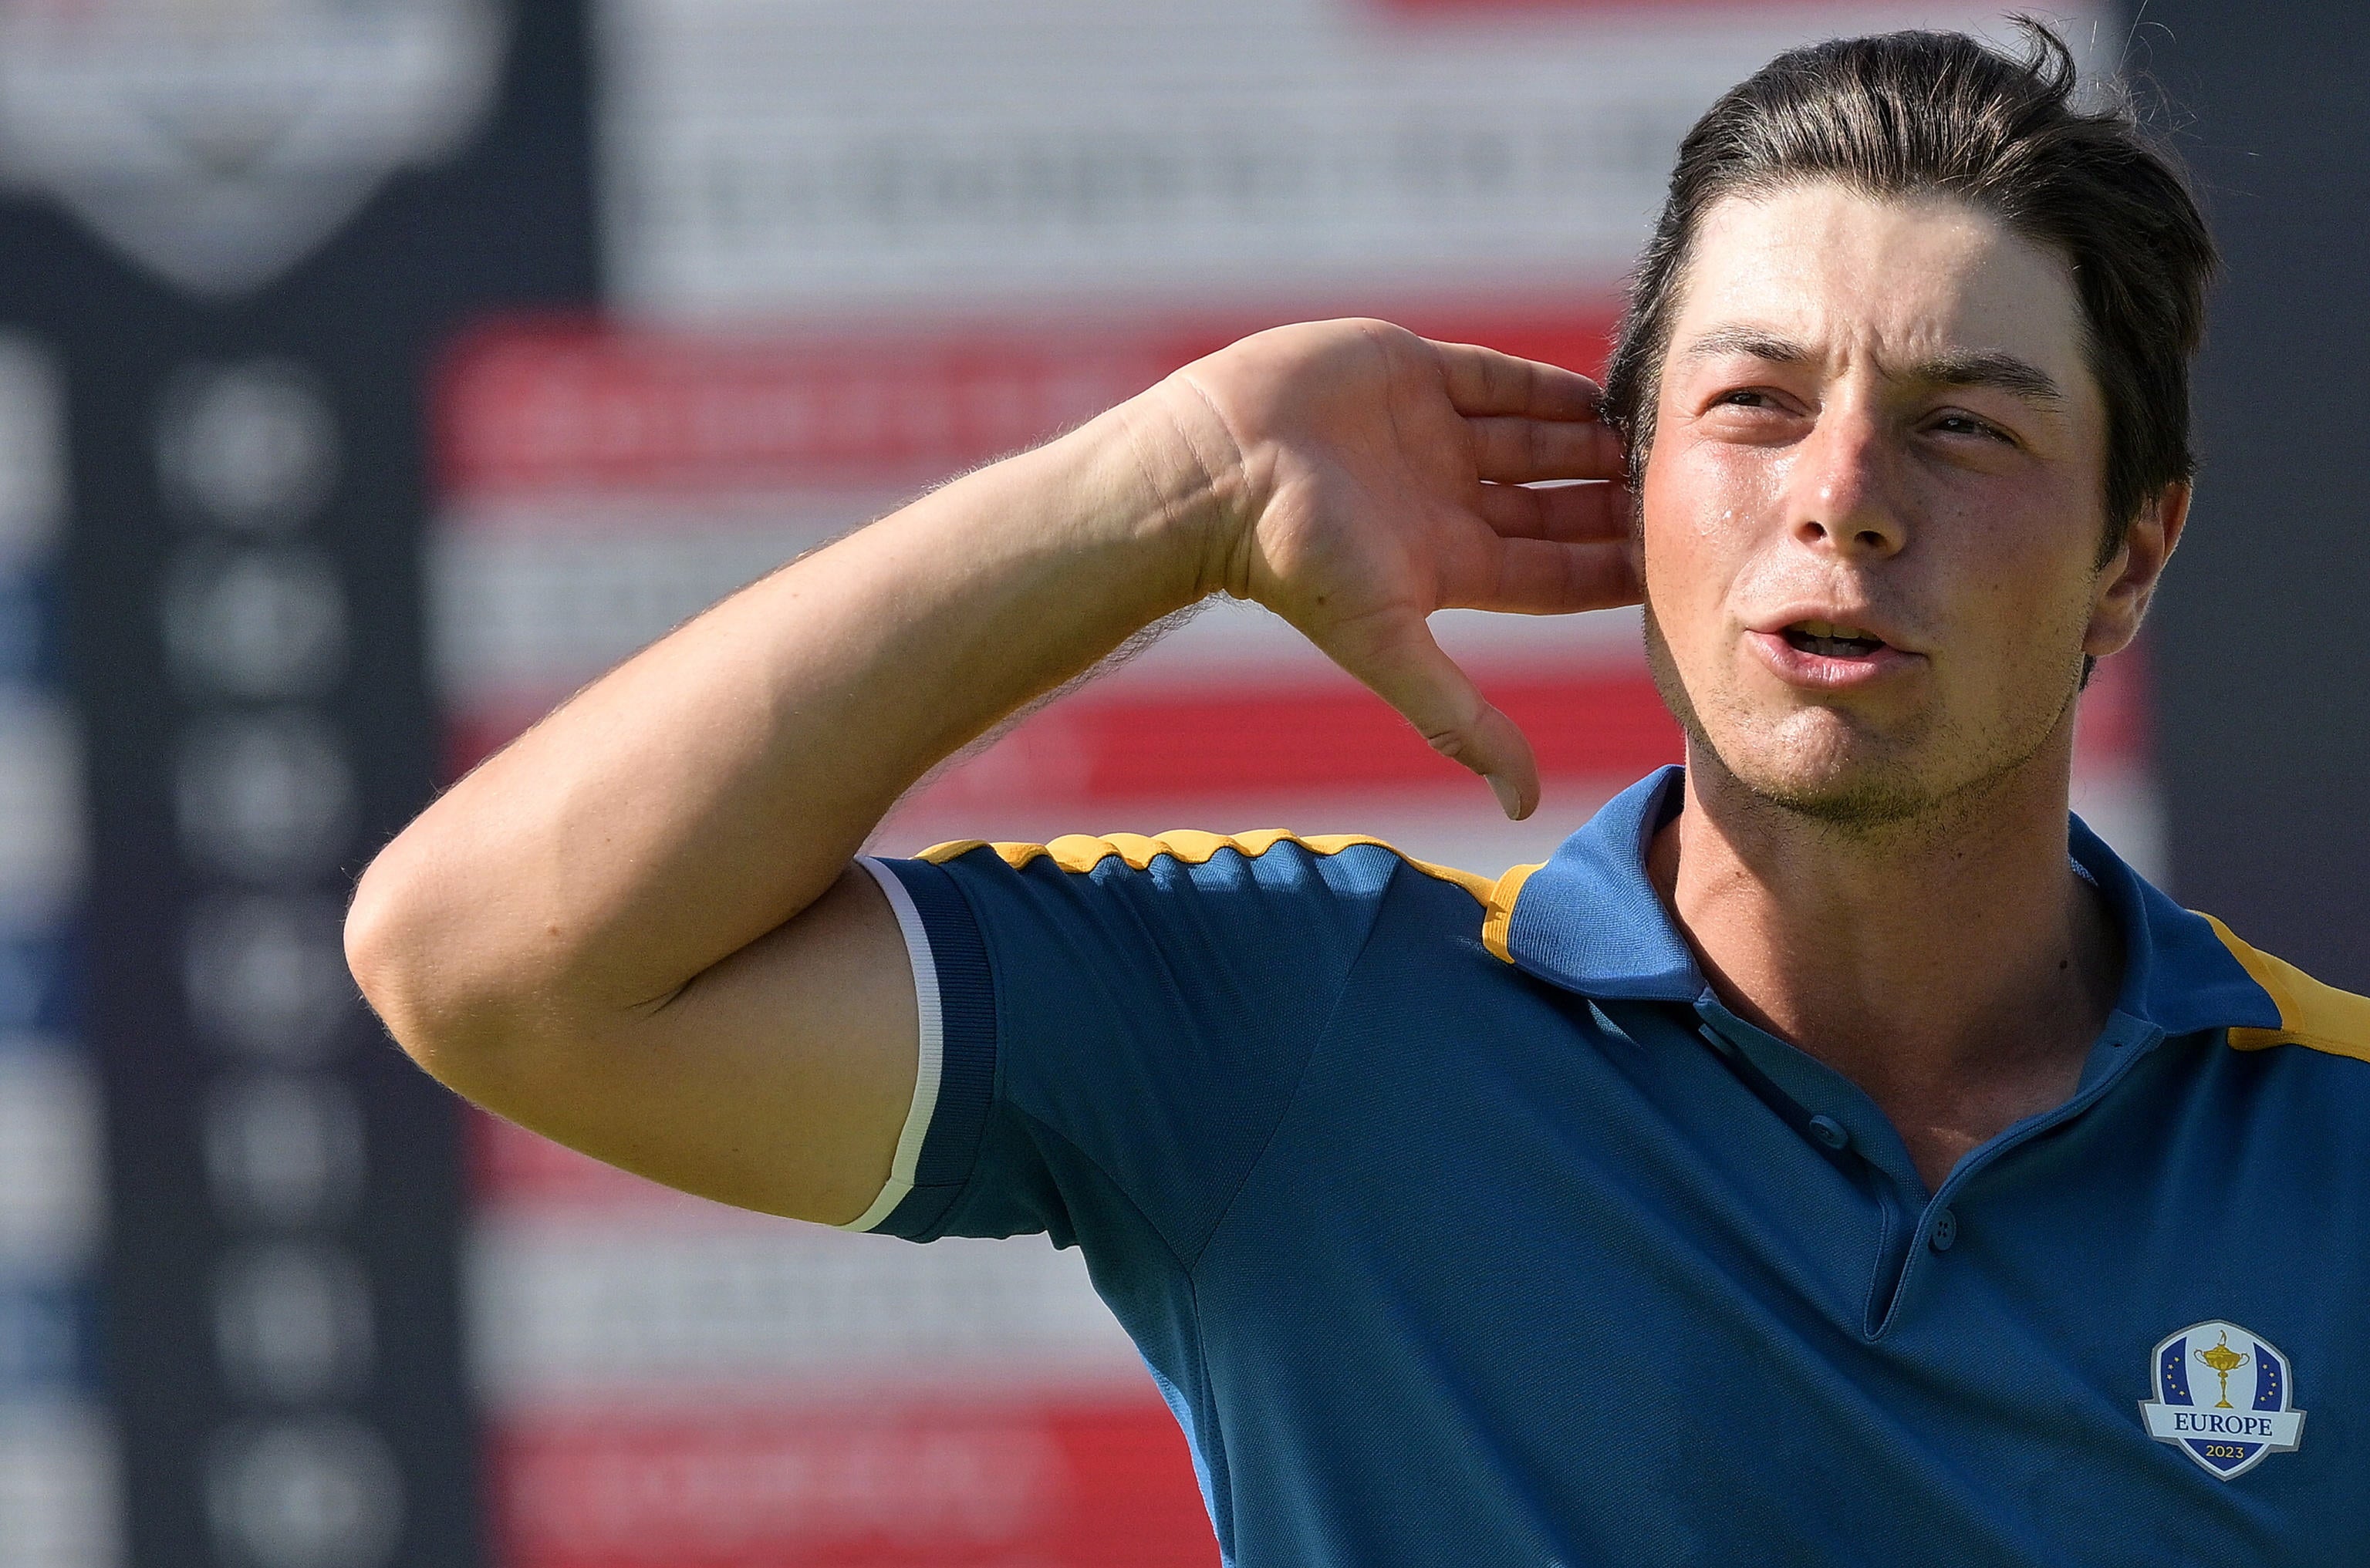 Sign of the times: Viktor Hovland pocketed more than £14m by winning the PGA Tour Championship back in August